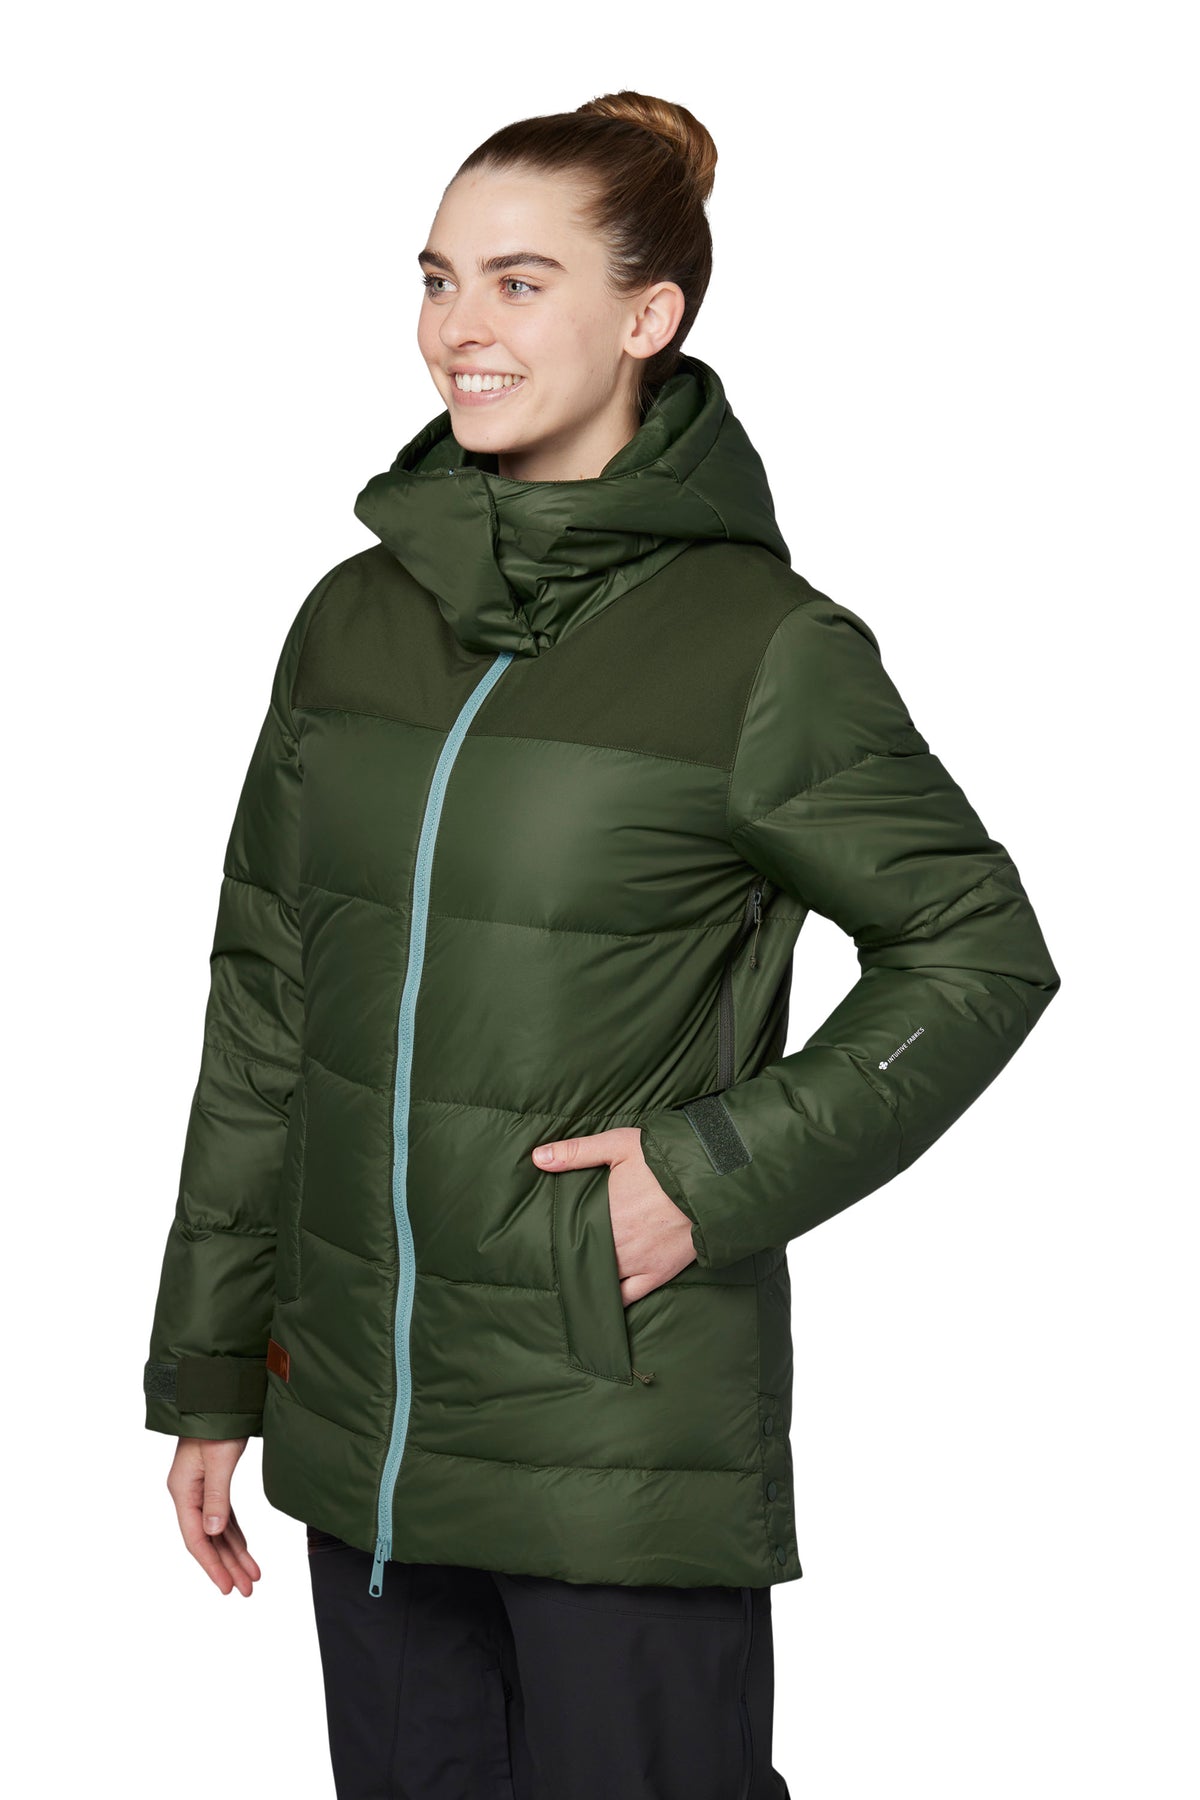 Womens Puffer Jacket Winter Warm Stand Collar Packable Down Jacket  Lightweight Slim Fit Short Down Coat Jacket with Pockets 